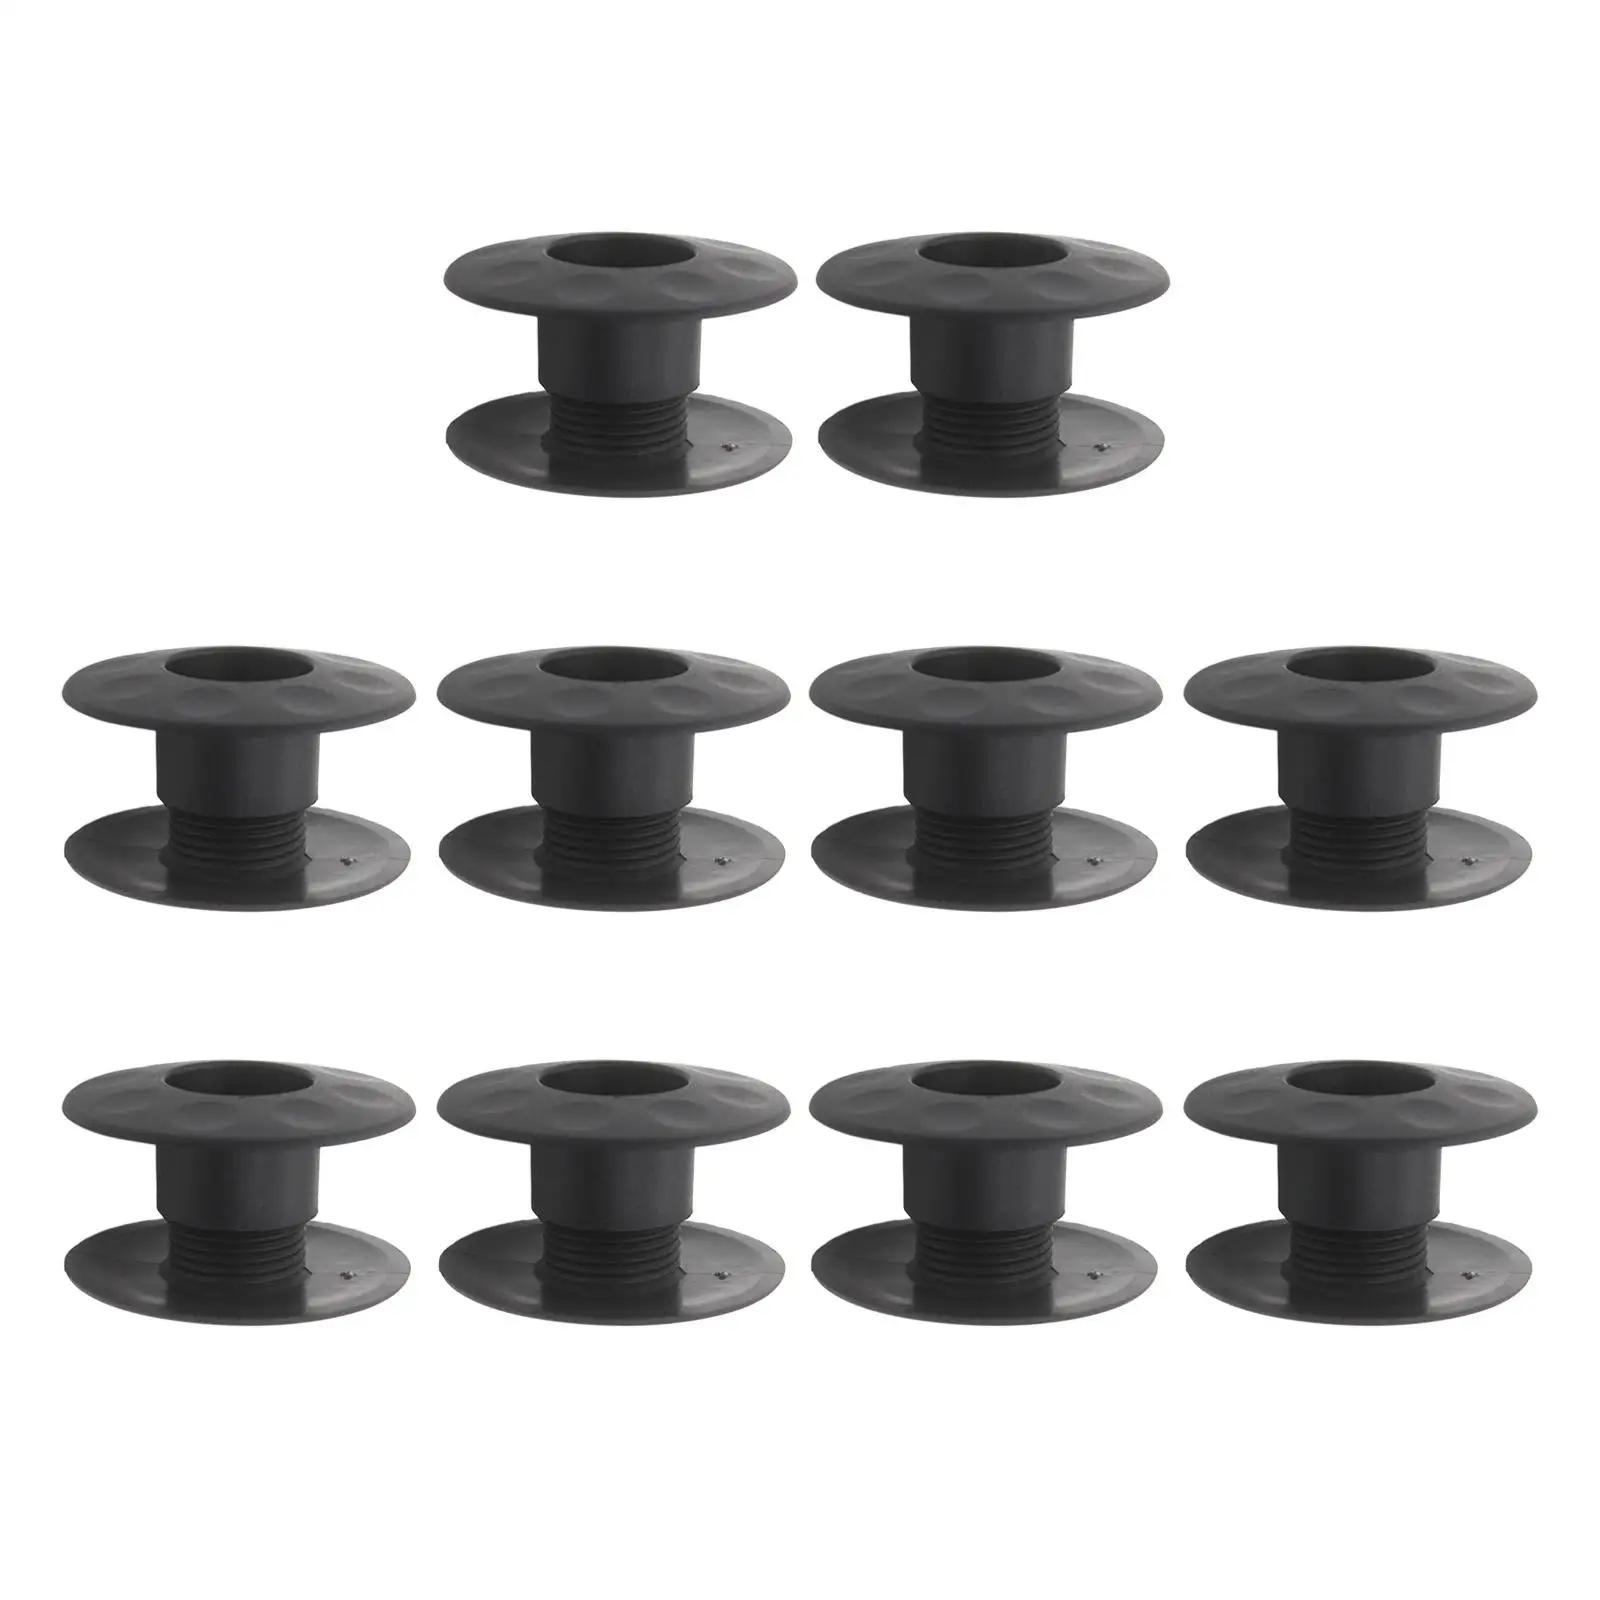 10x Table Football Bearing Rods Threaded Structure Lightweight Foosball Bushings